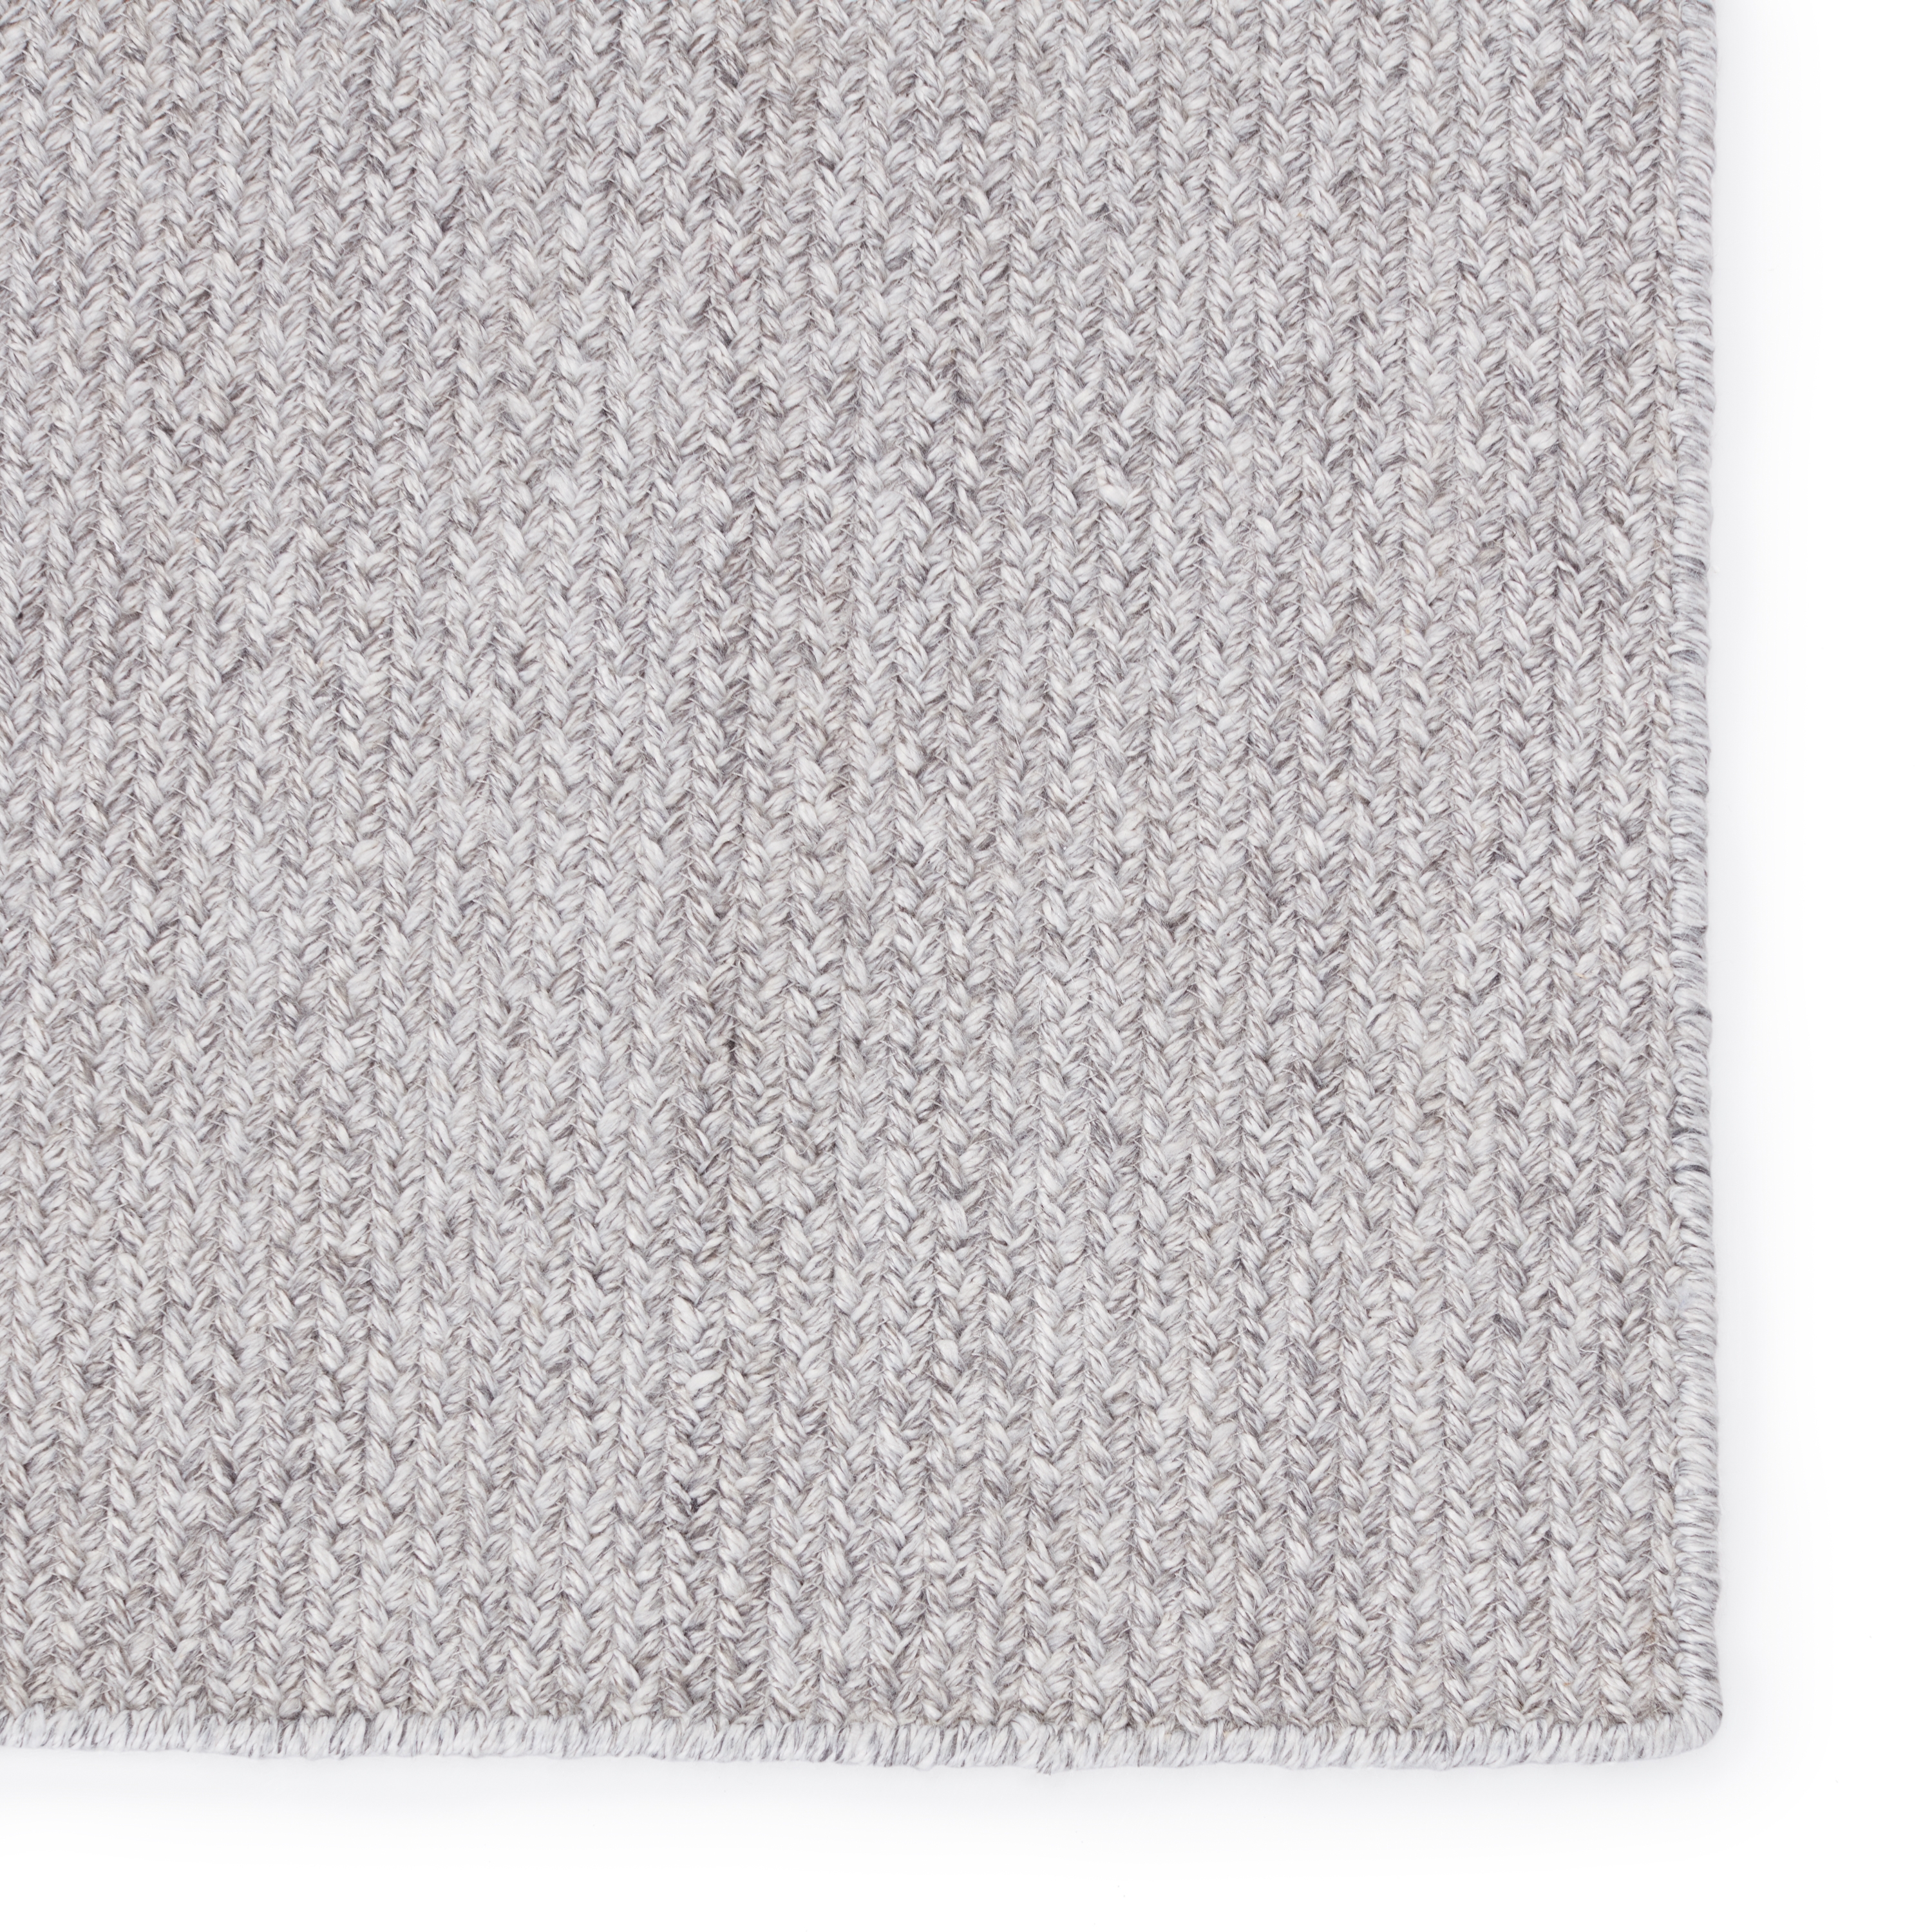 Maracay Indoor/ Outdoor Solid Light Gray/ White Area Rug (4'X6') - Image 3